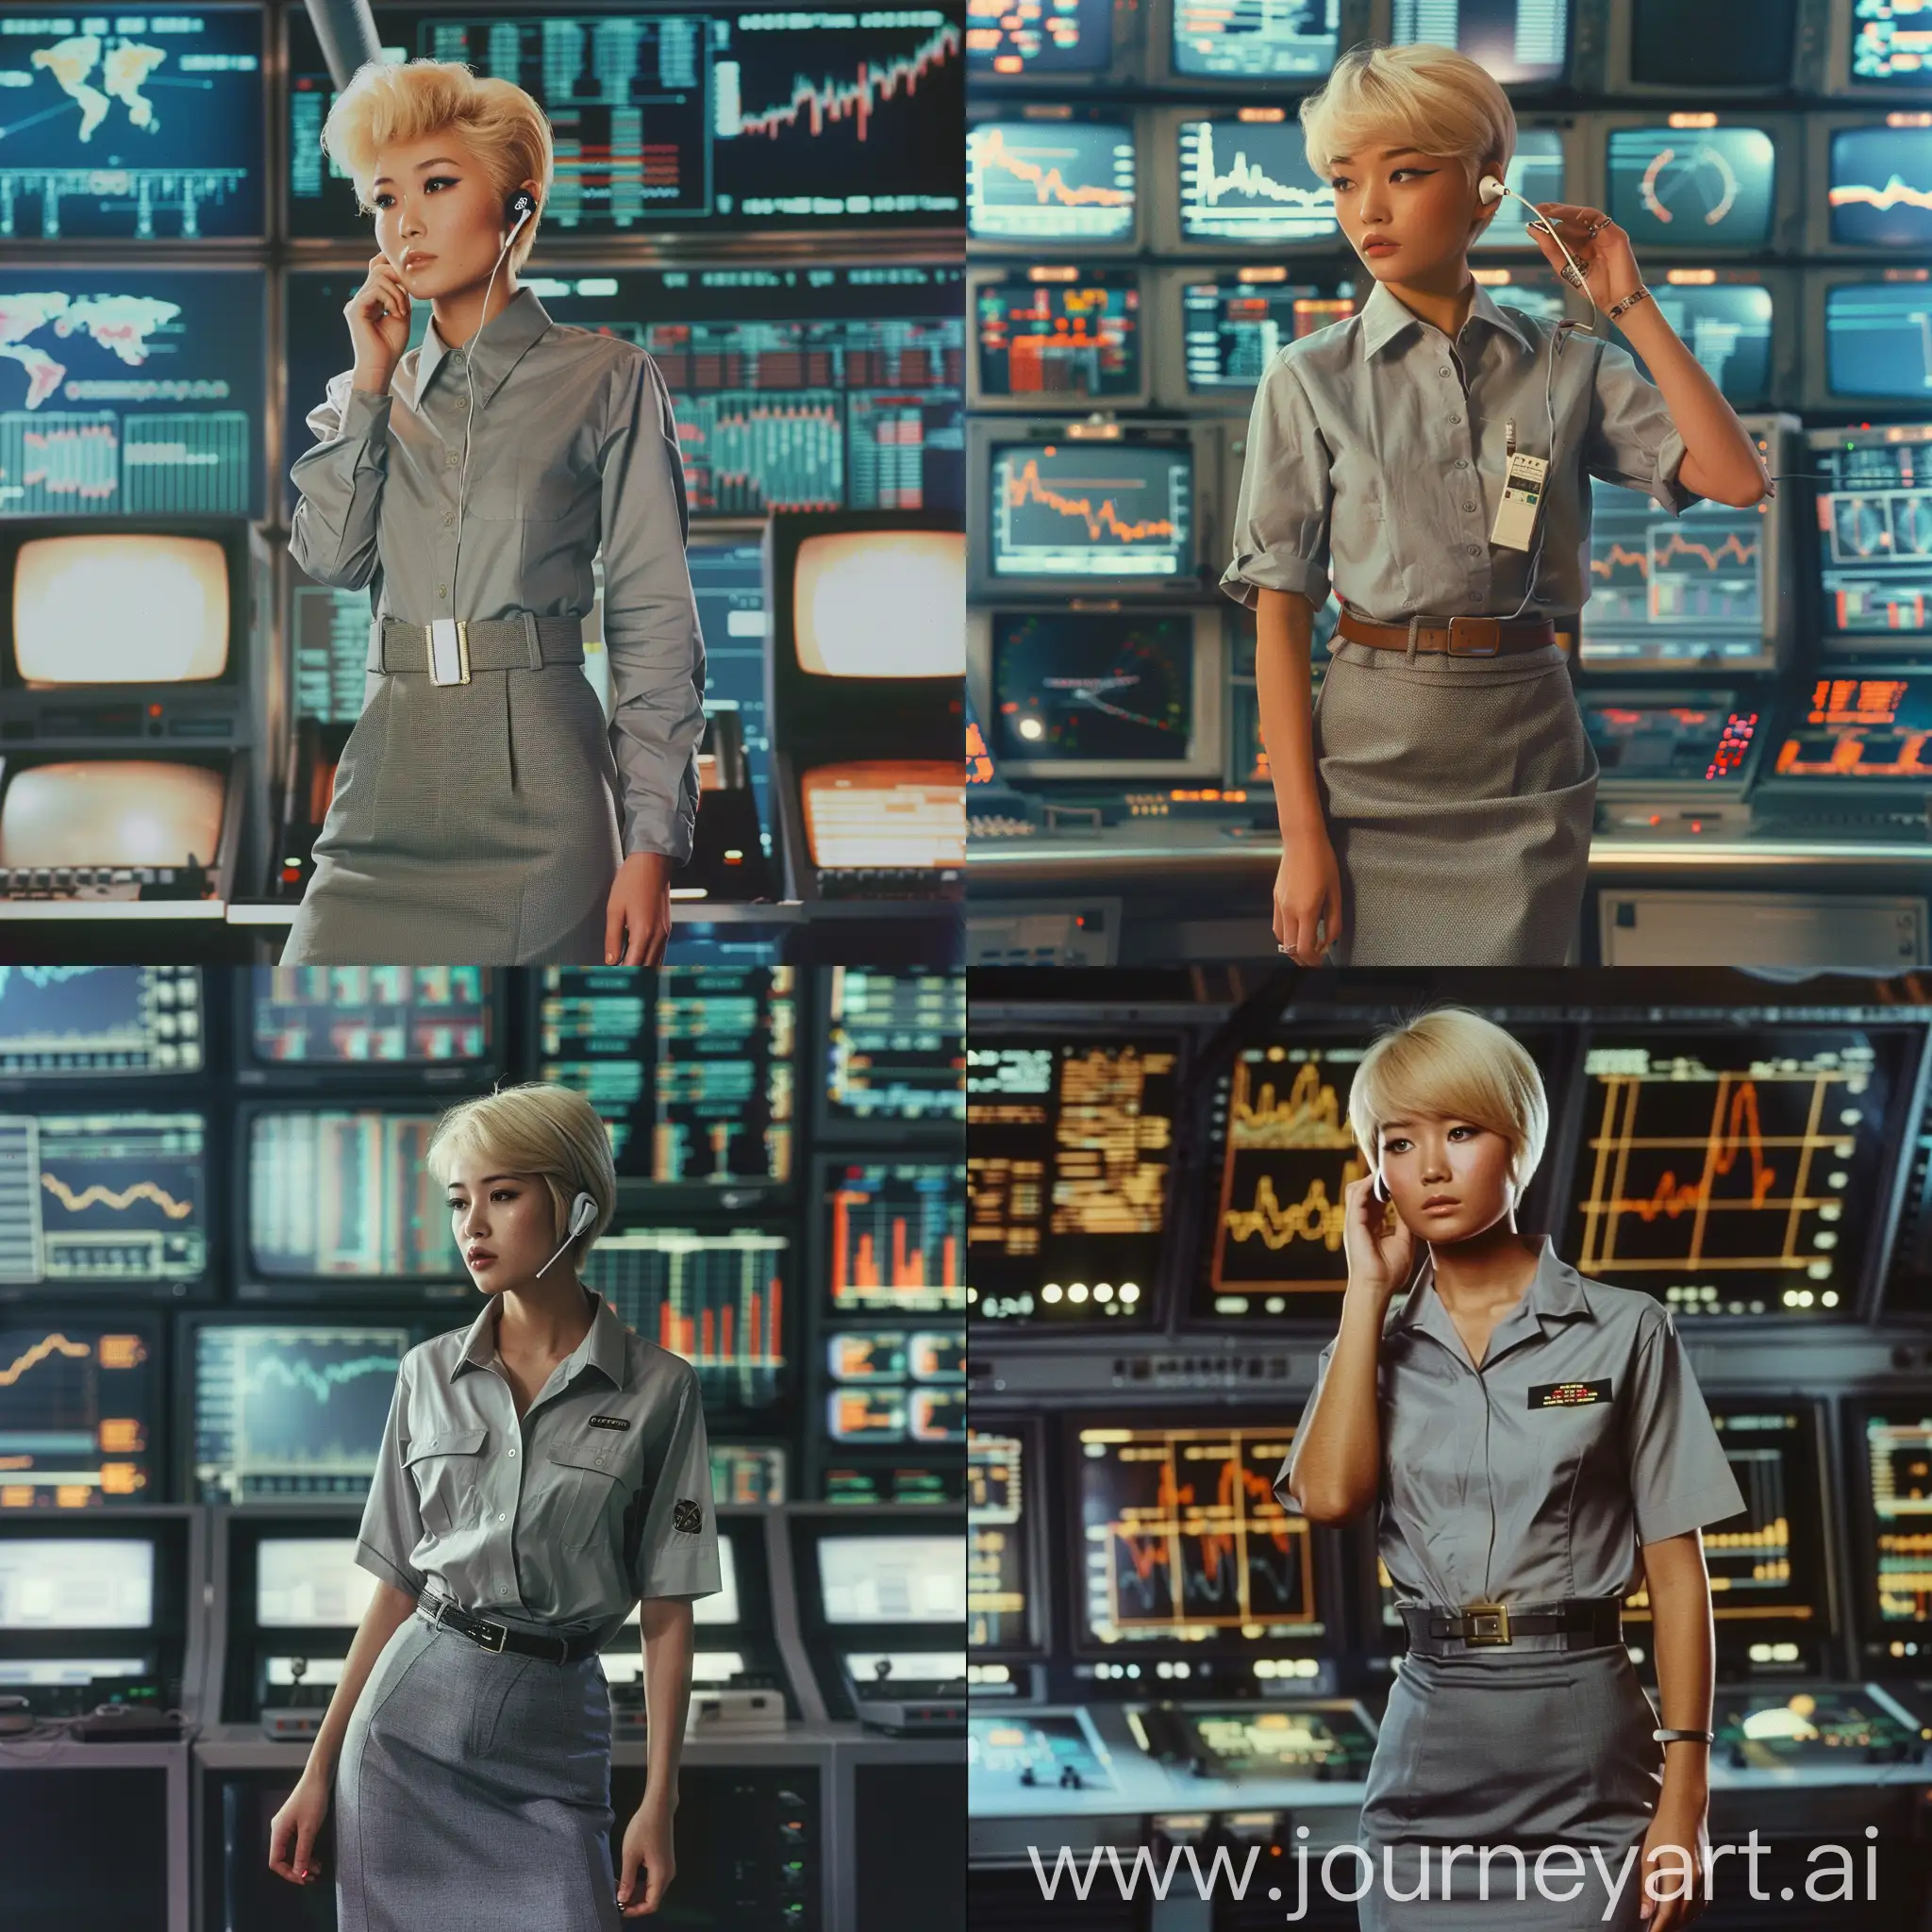 noble blond blonde with short hair mixed Asian and European in a gray shirt and skirt with an earphone in her ear in front of a background of monitors and charts in a sci-fi style, 1980